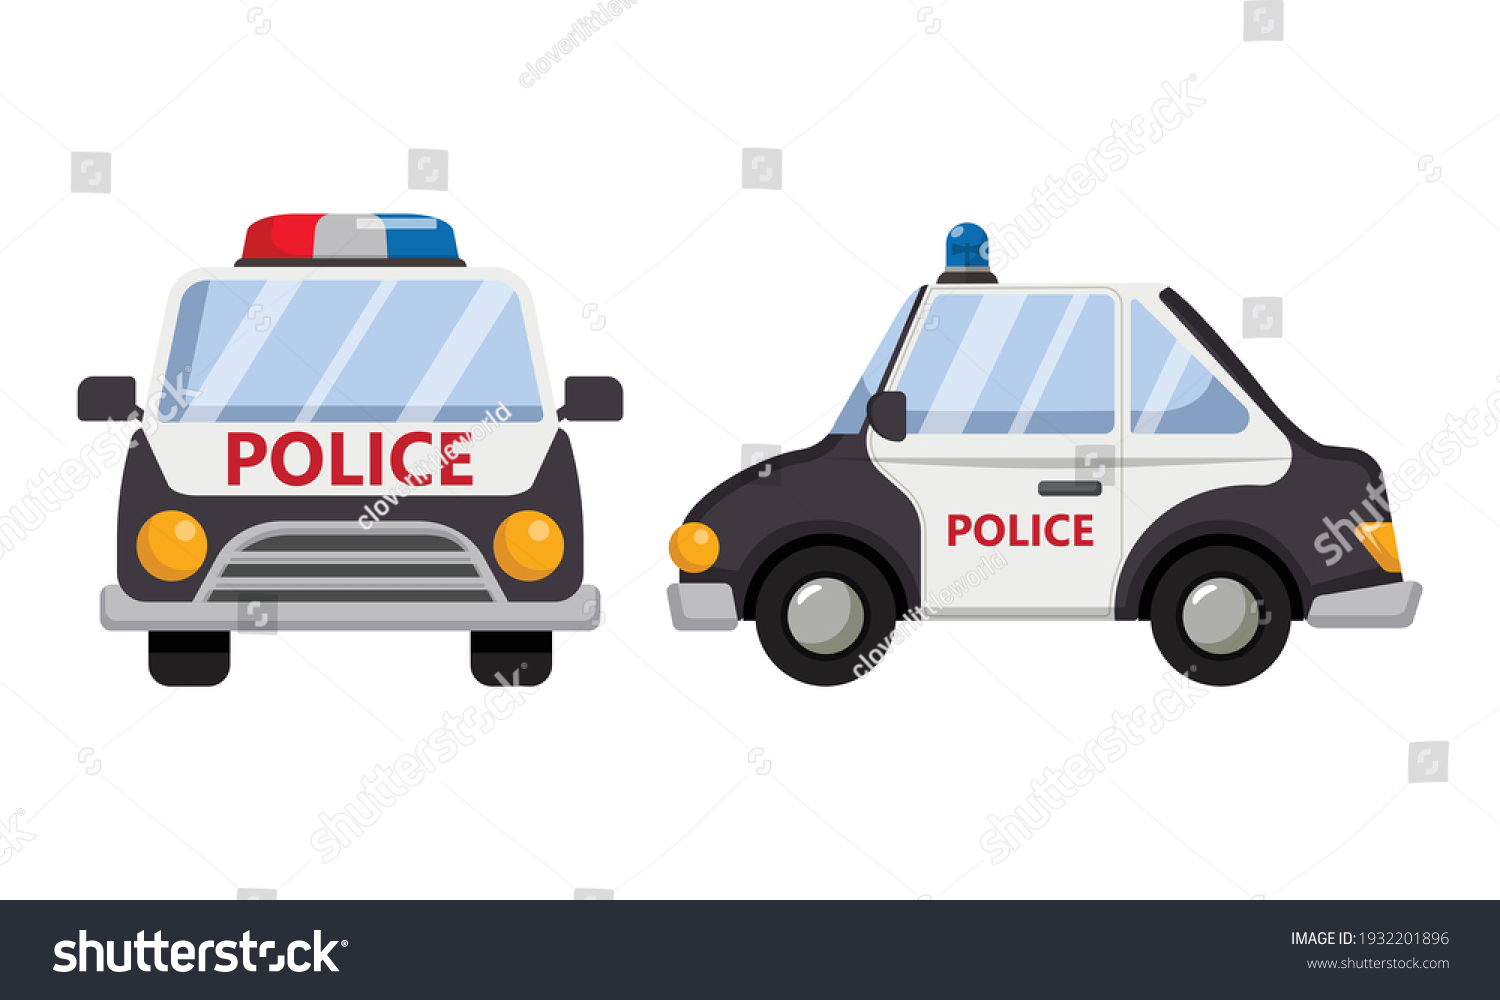 SVG of Police car front and side view. Flat cartoon style transportation isolated on white svg